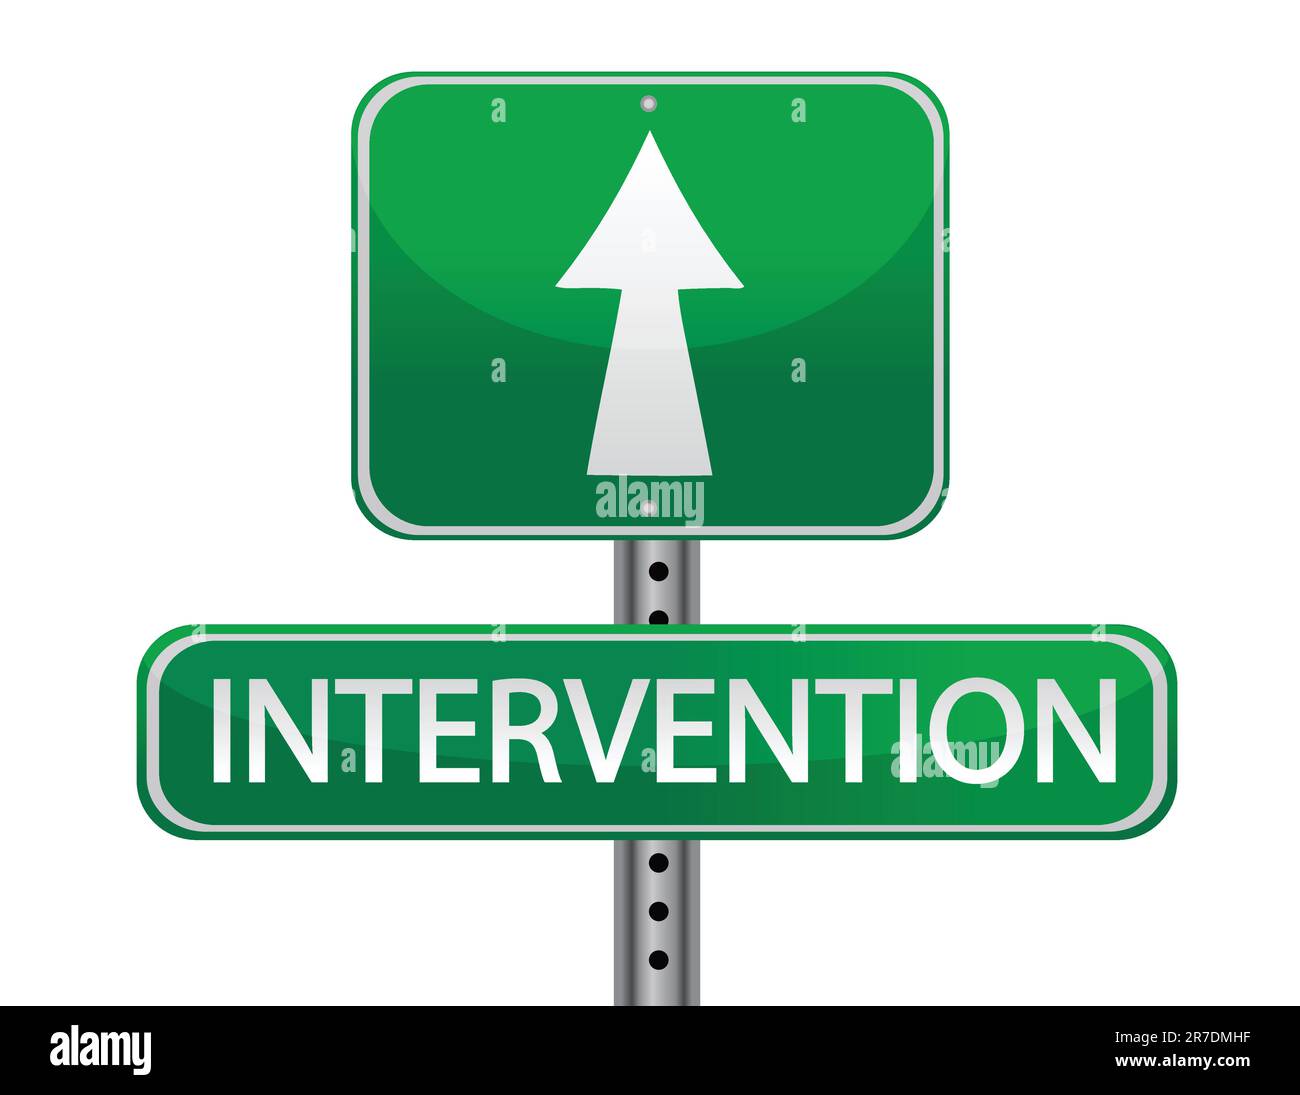 intervention street sign concept illustration isolated over white Stock Vector